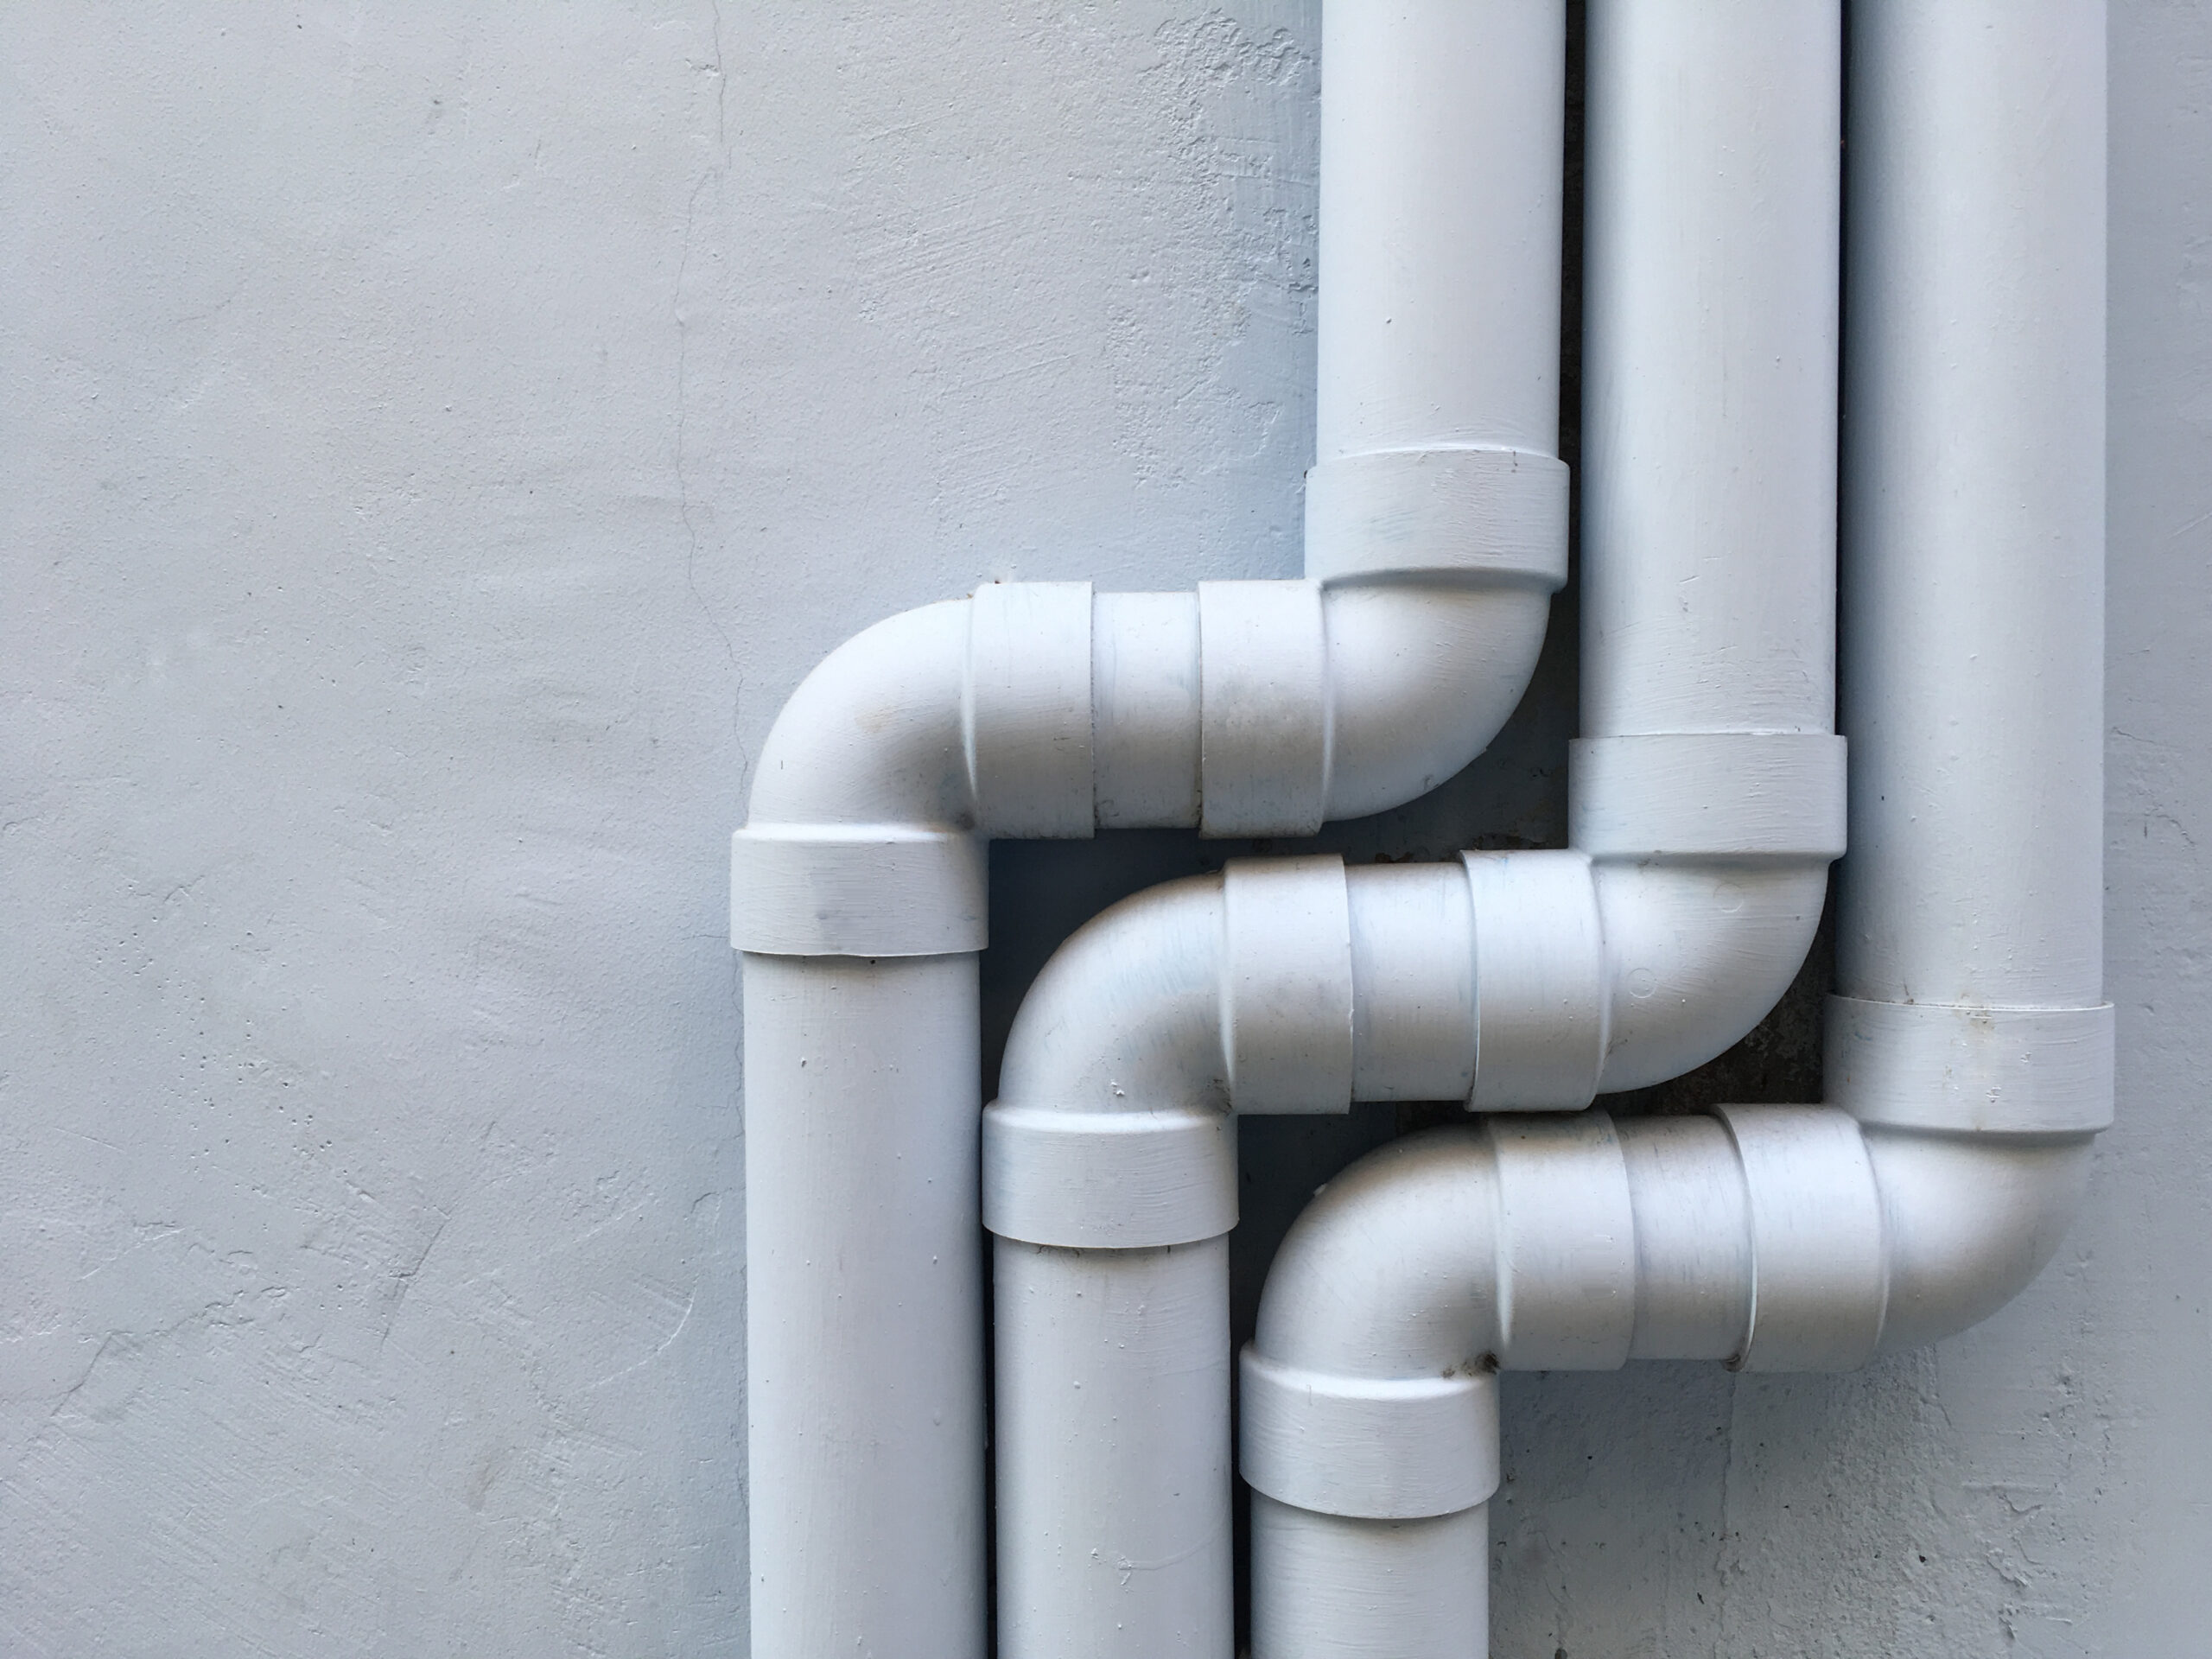 What is involved in repiping a house?